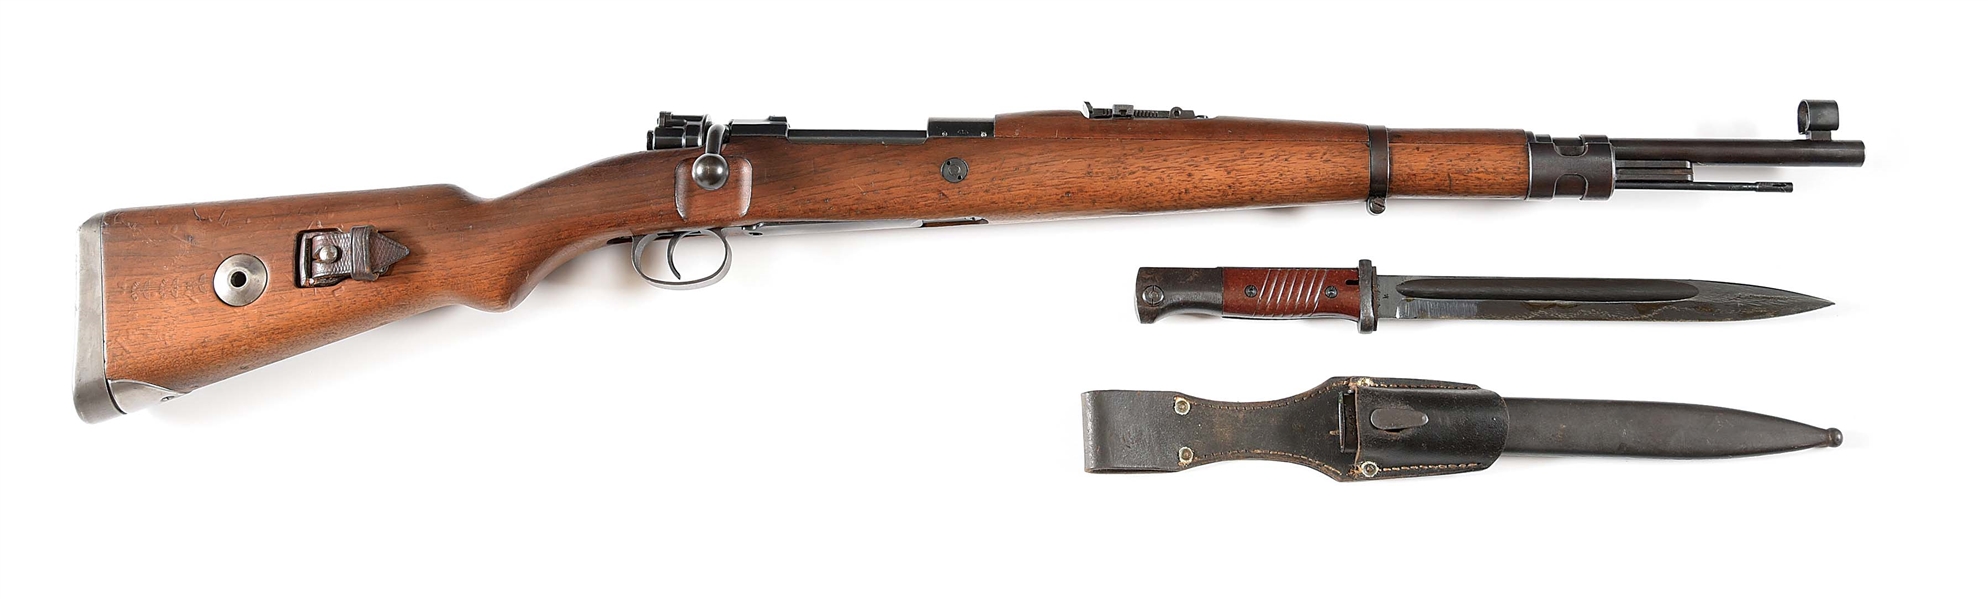 (C) MAUSER MODEL 33/40 BOLT ACTION RIFLE WITH BAYONET.